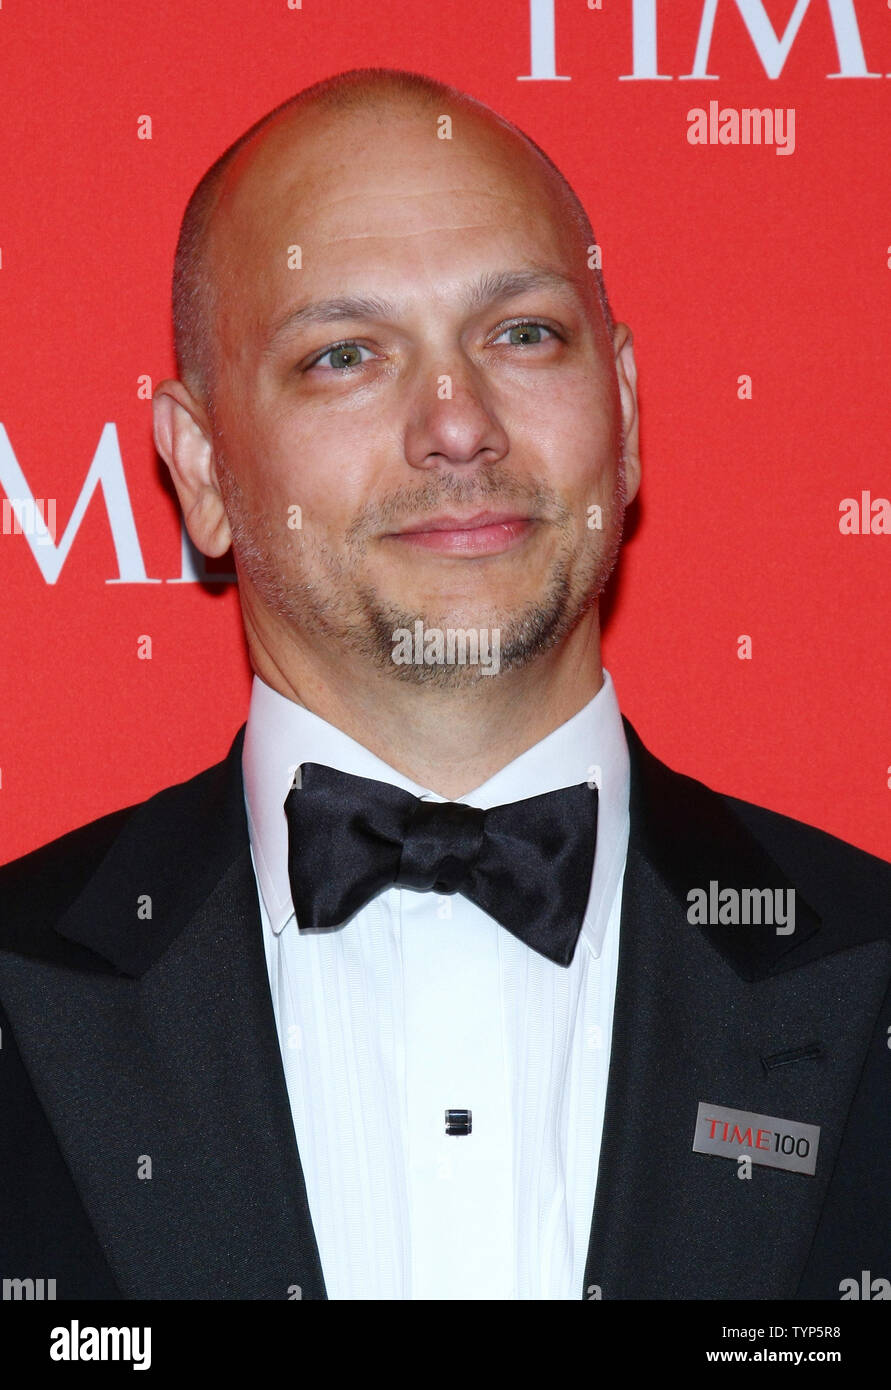 Tony Fadell arrives on the red carpet at the TIME 100 Gala at Jazz at Lincoln Center on April 29, 2014 in New York City.     UPI/Monika Graff Stock Photo